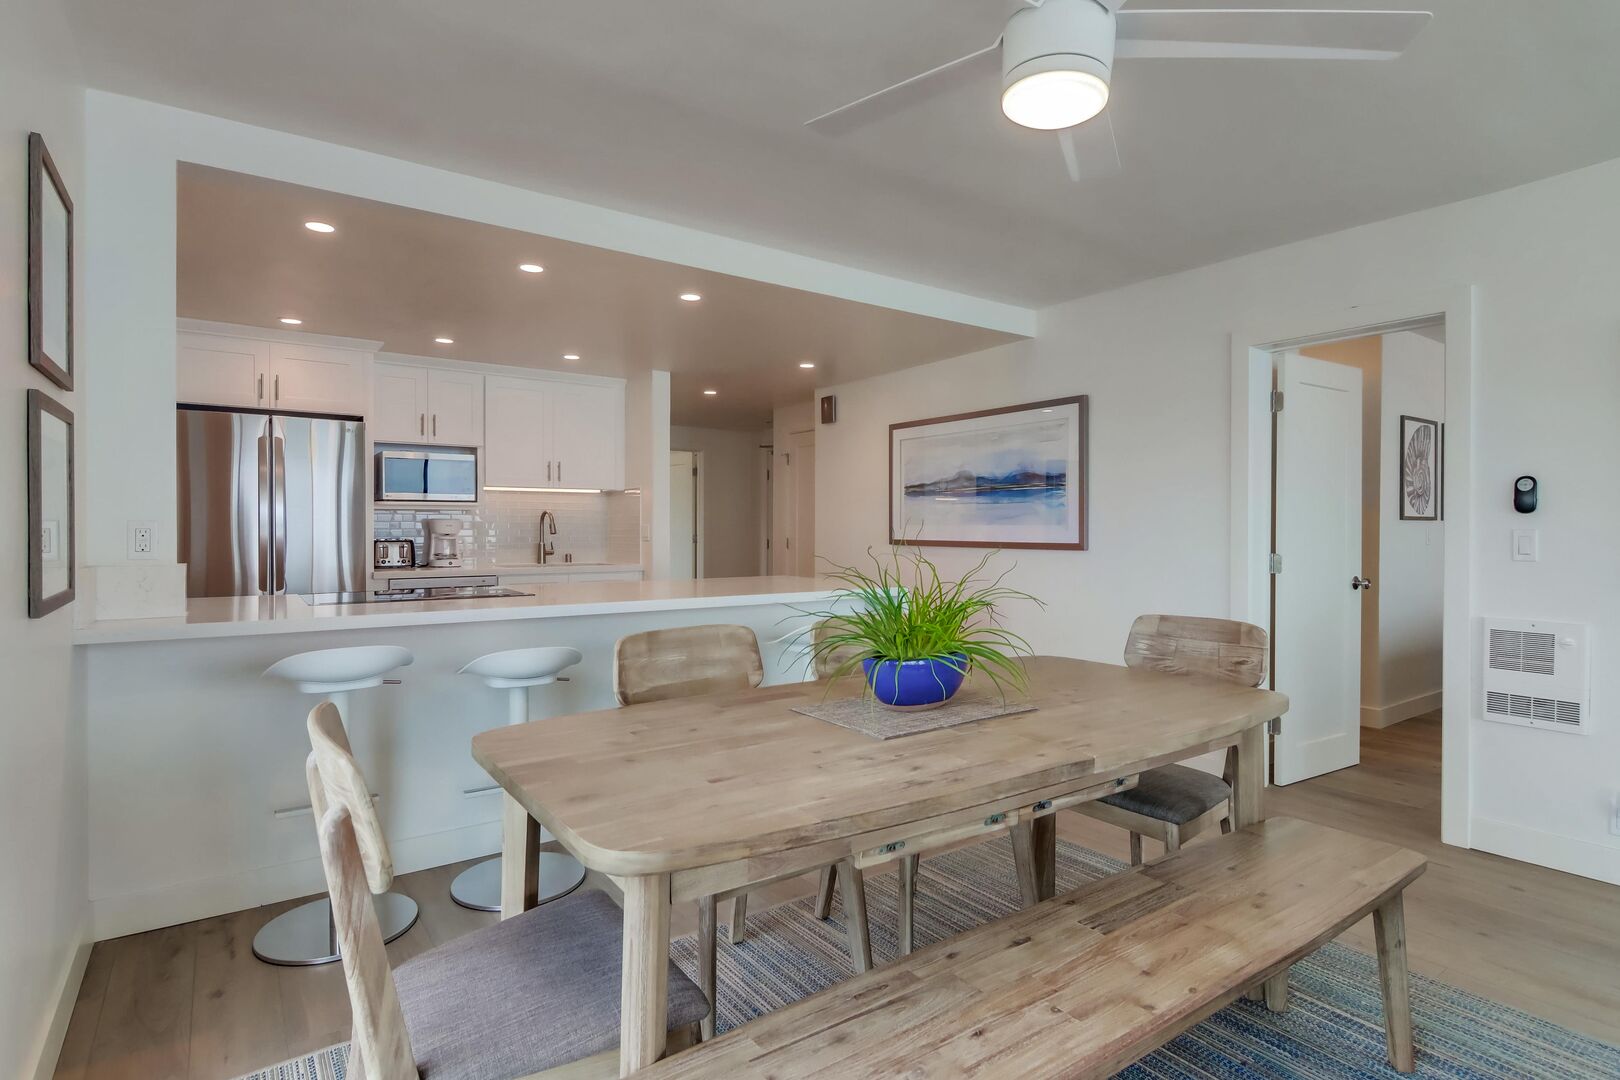 Beautifully remodeled, open dining room and kitchen